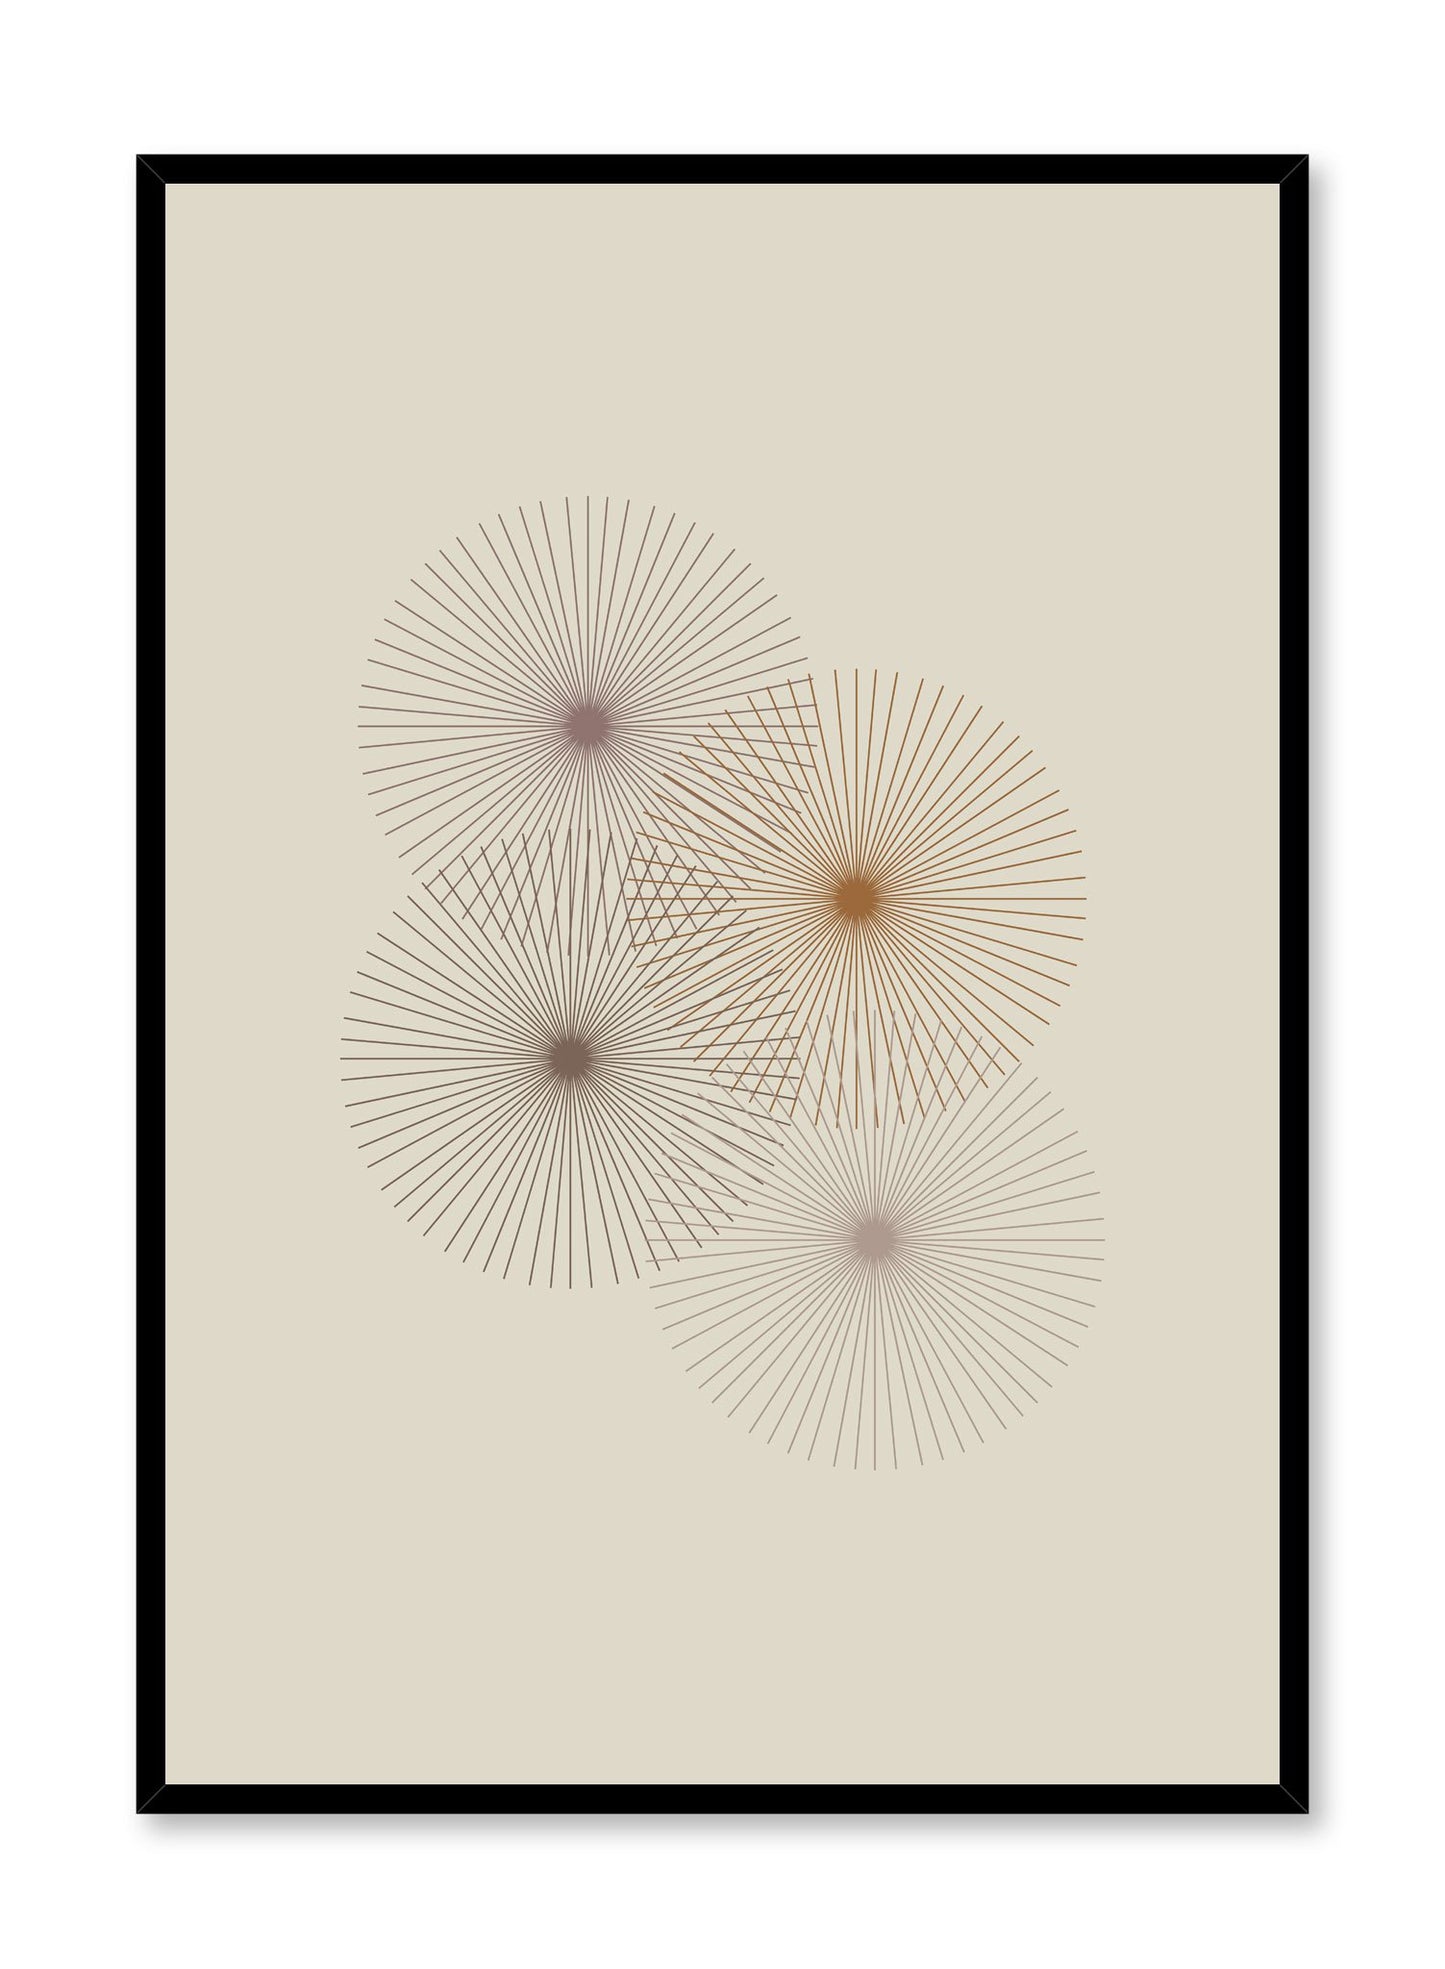 Minimalist design poster by Opposite Wall with Geometric Bouquet abstract graphic design of three floral circles in beige